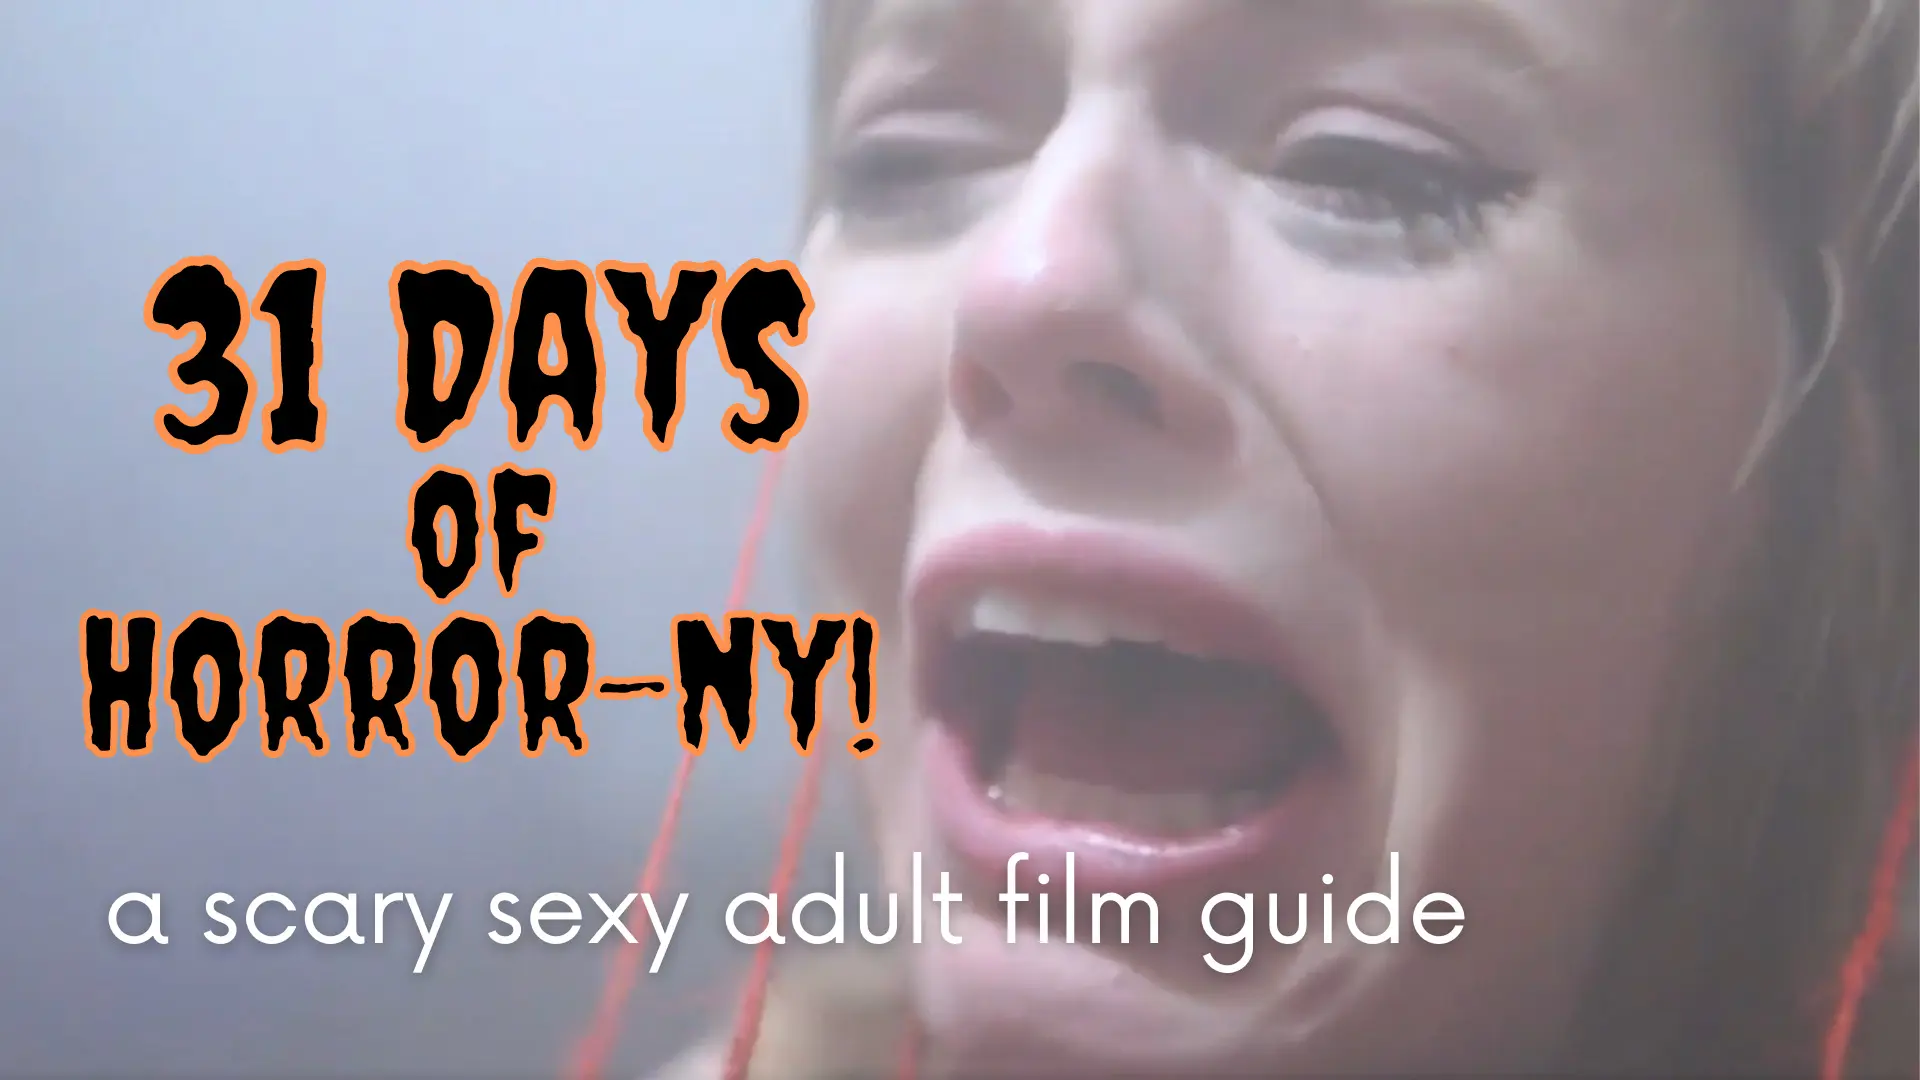 31 Days of Horror-ny! Scary Sexy Adult Films - PinkLabel.TV